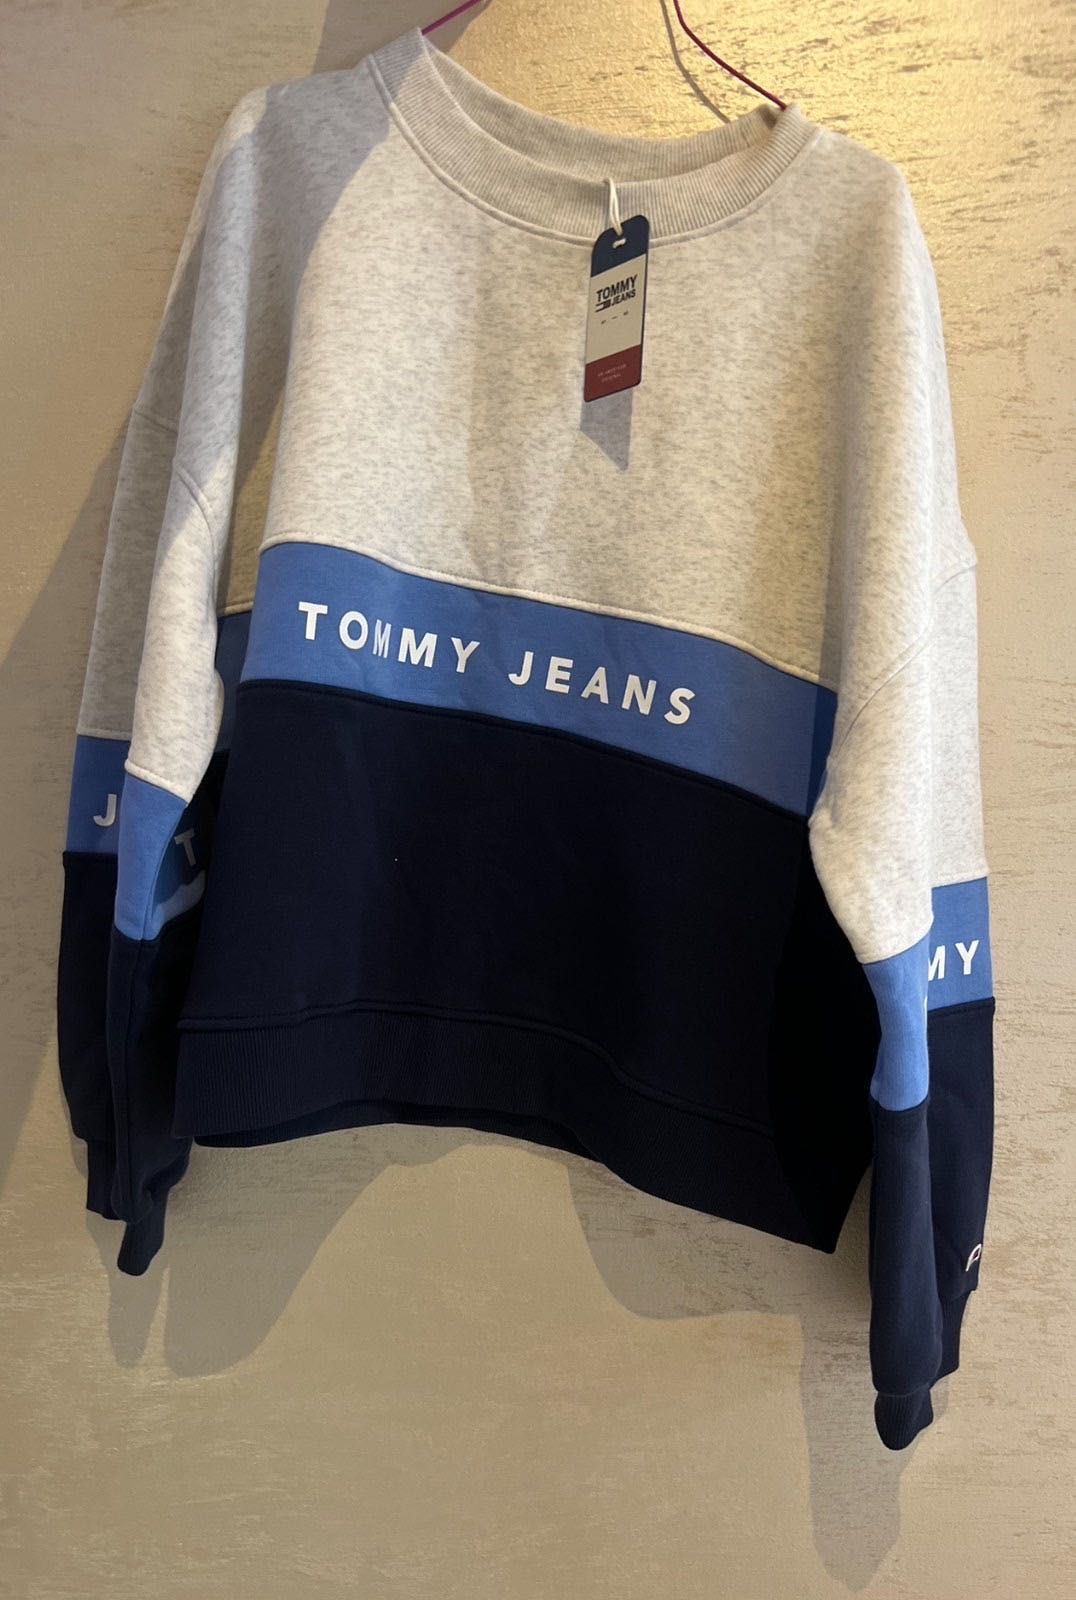 Tommy Jeans размер М